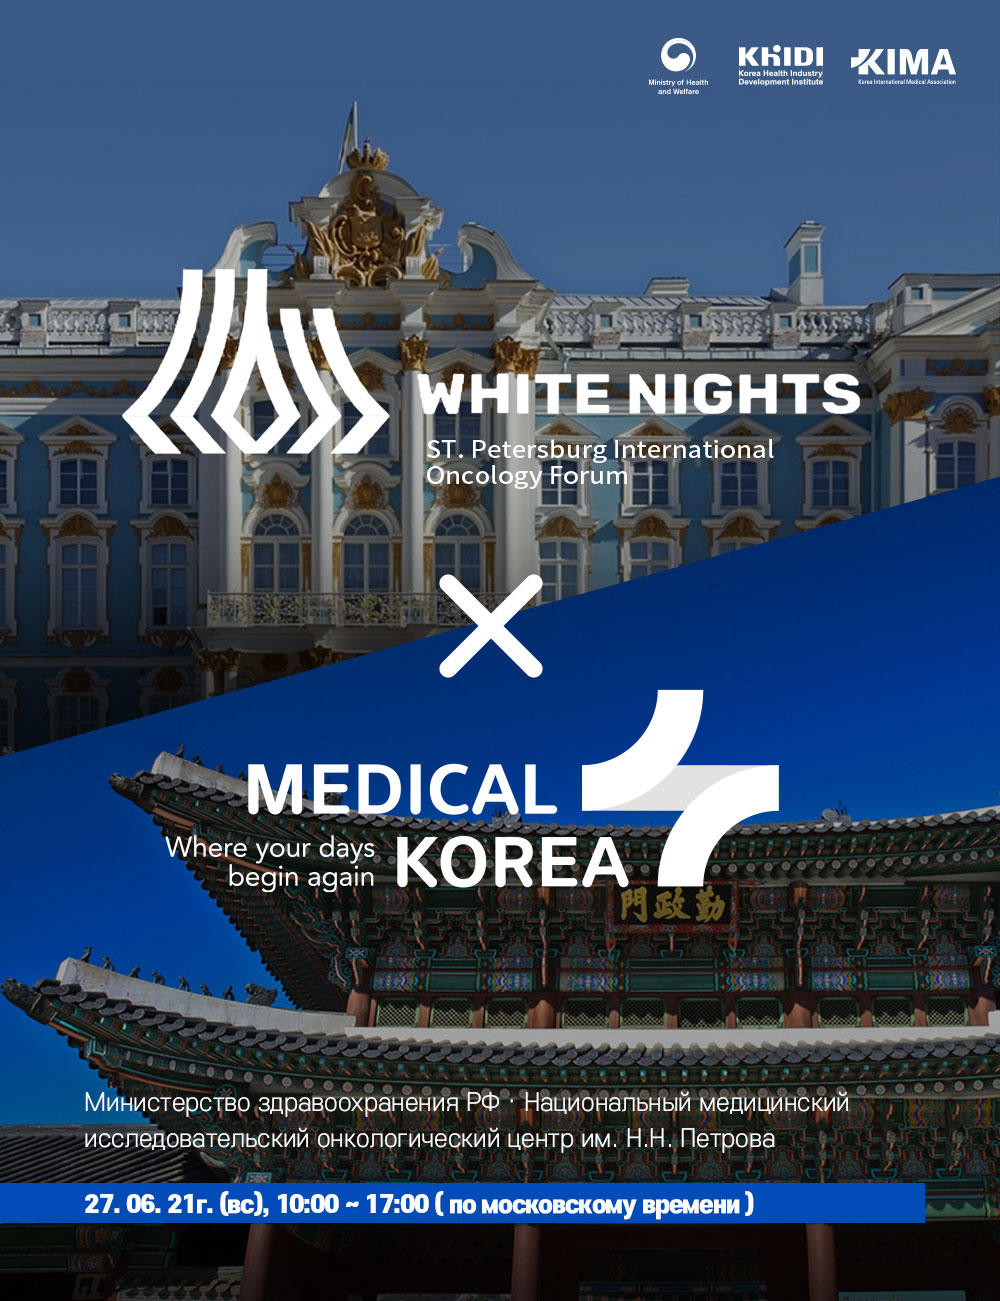 [WHITE NIGHTS(ST. Petersburg International Oncology Forum) X MEDICAL KOREA (Where your days begin again)] Ministry of Health of the Russian Federation National Medical Research Center of Oncology named after N.N. Petrov. 21.6.27(Sun), 10:00~17:00 (KST 16:00 ~ 23:00) * TBC